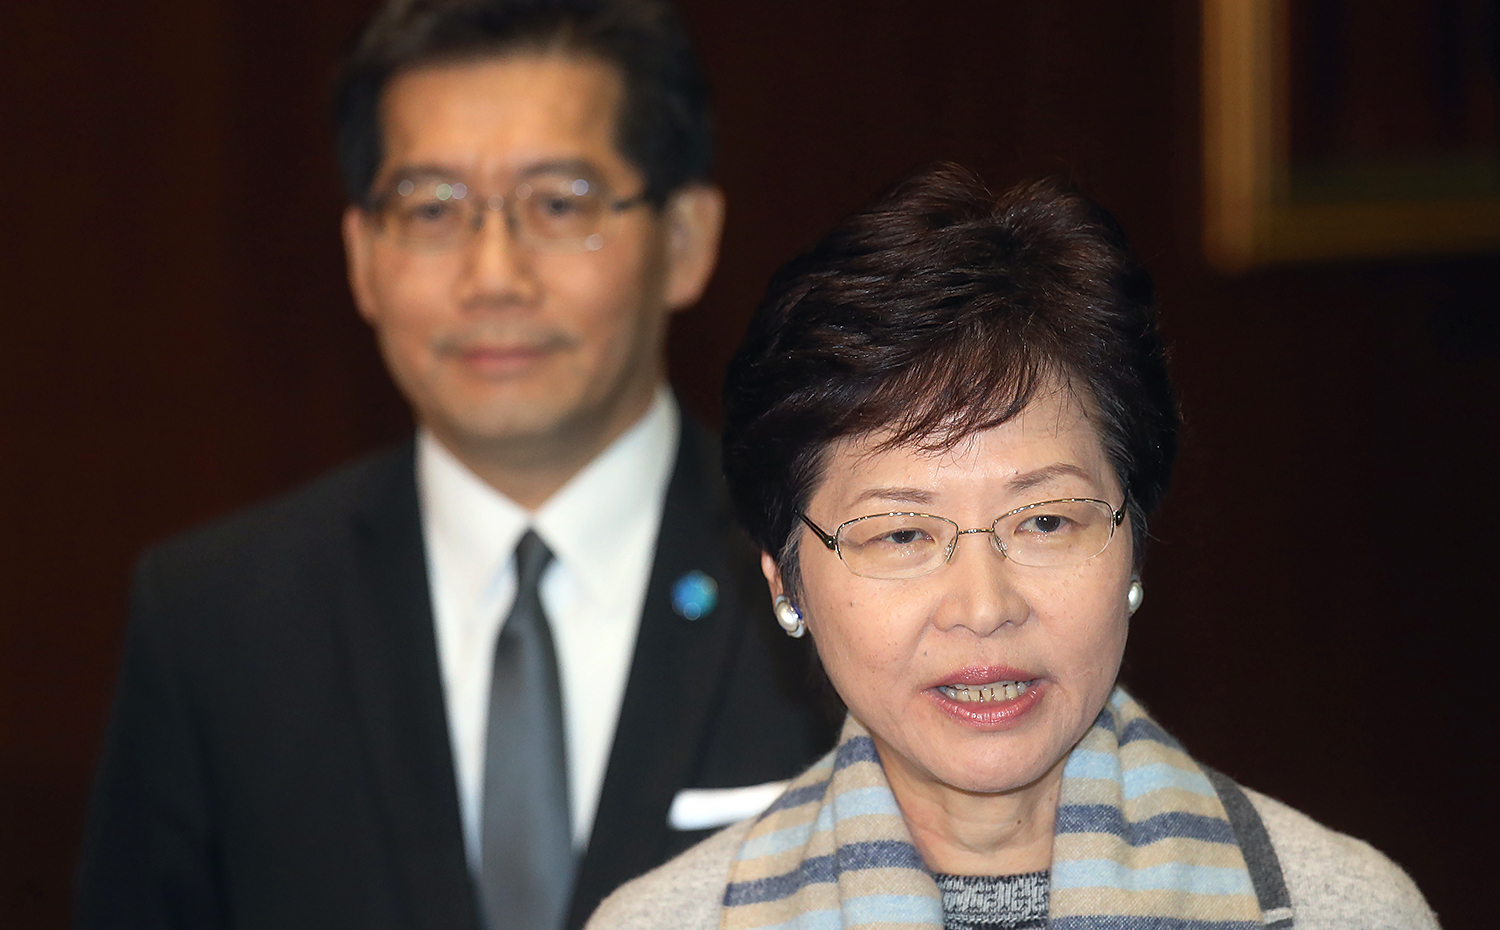 Hong Kong Chief Secretary Carrie Lam Cheng Yuet-Ngor meets Legco president Jasper Tsang Yok-sing to discuss meeting arrangements for the controversial copyright bill at the Legco Complex in Tamar. 27JAN16 SCMP/ David Wong